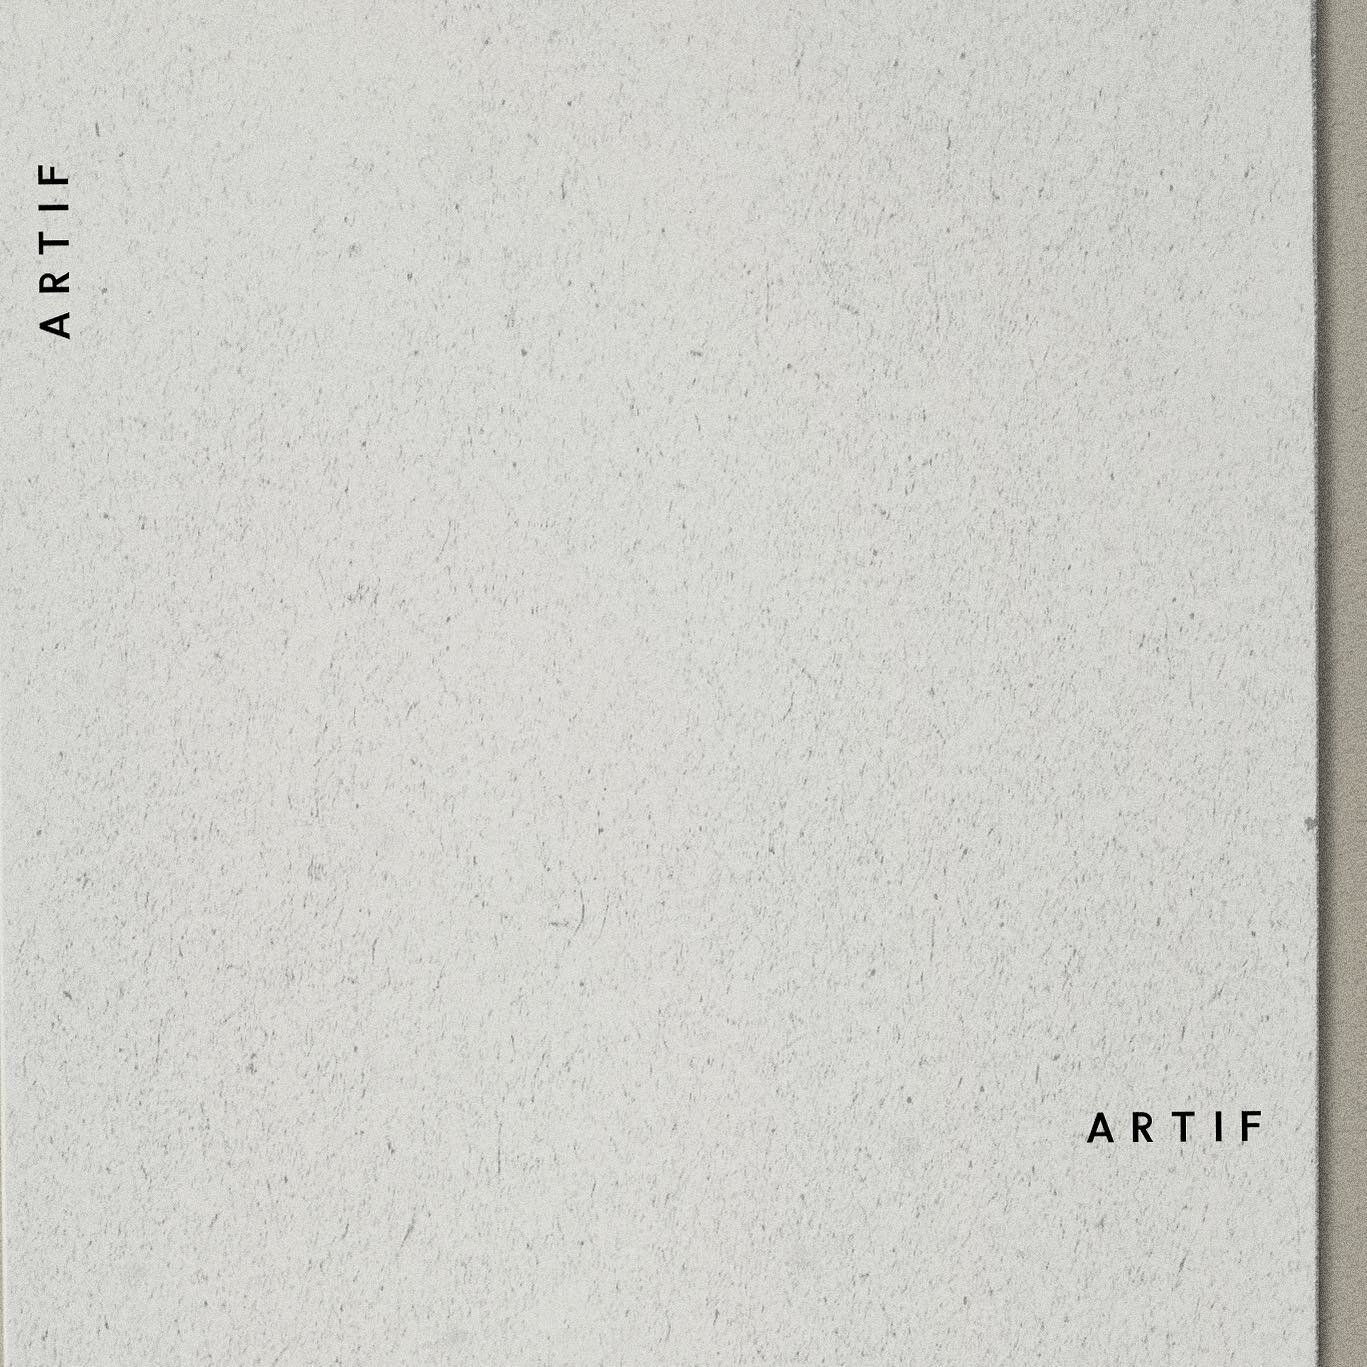 ARTIF |  About us
.
.
 
Artifact / Artefact refers to an object that holds significance, principally bound to its relationship to a specific historical period or cultural movement. 
 
Our curated catalogue illustrates the materialisation of form and 